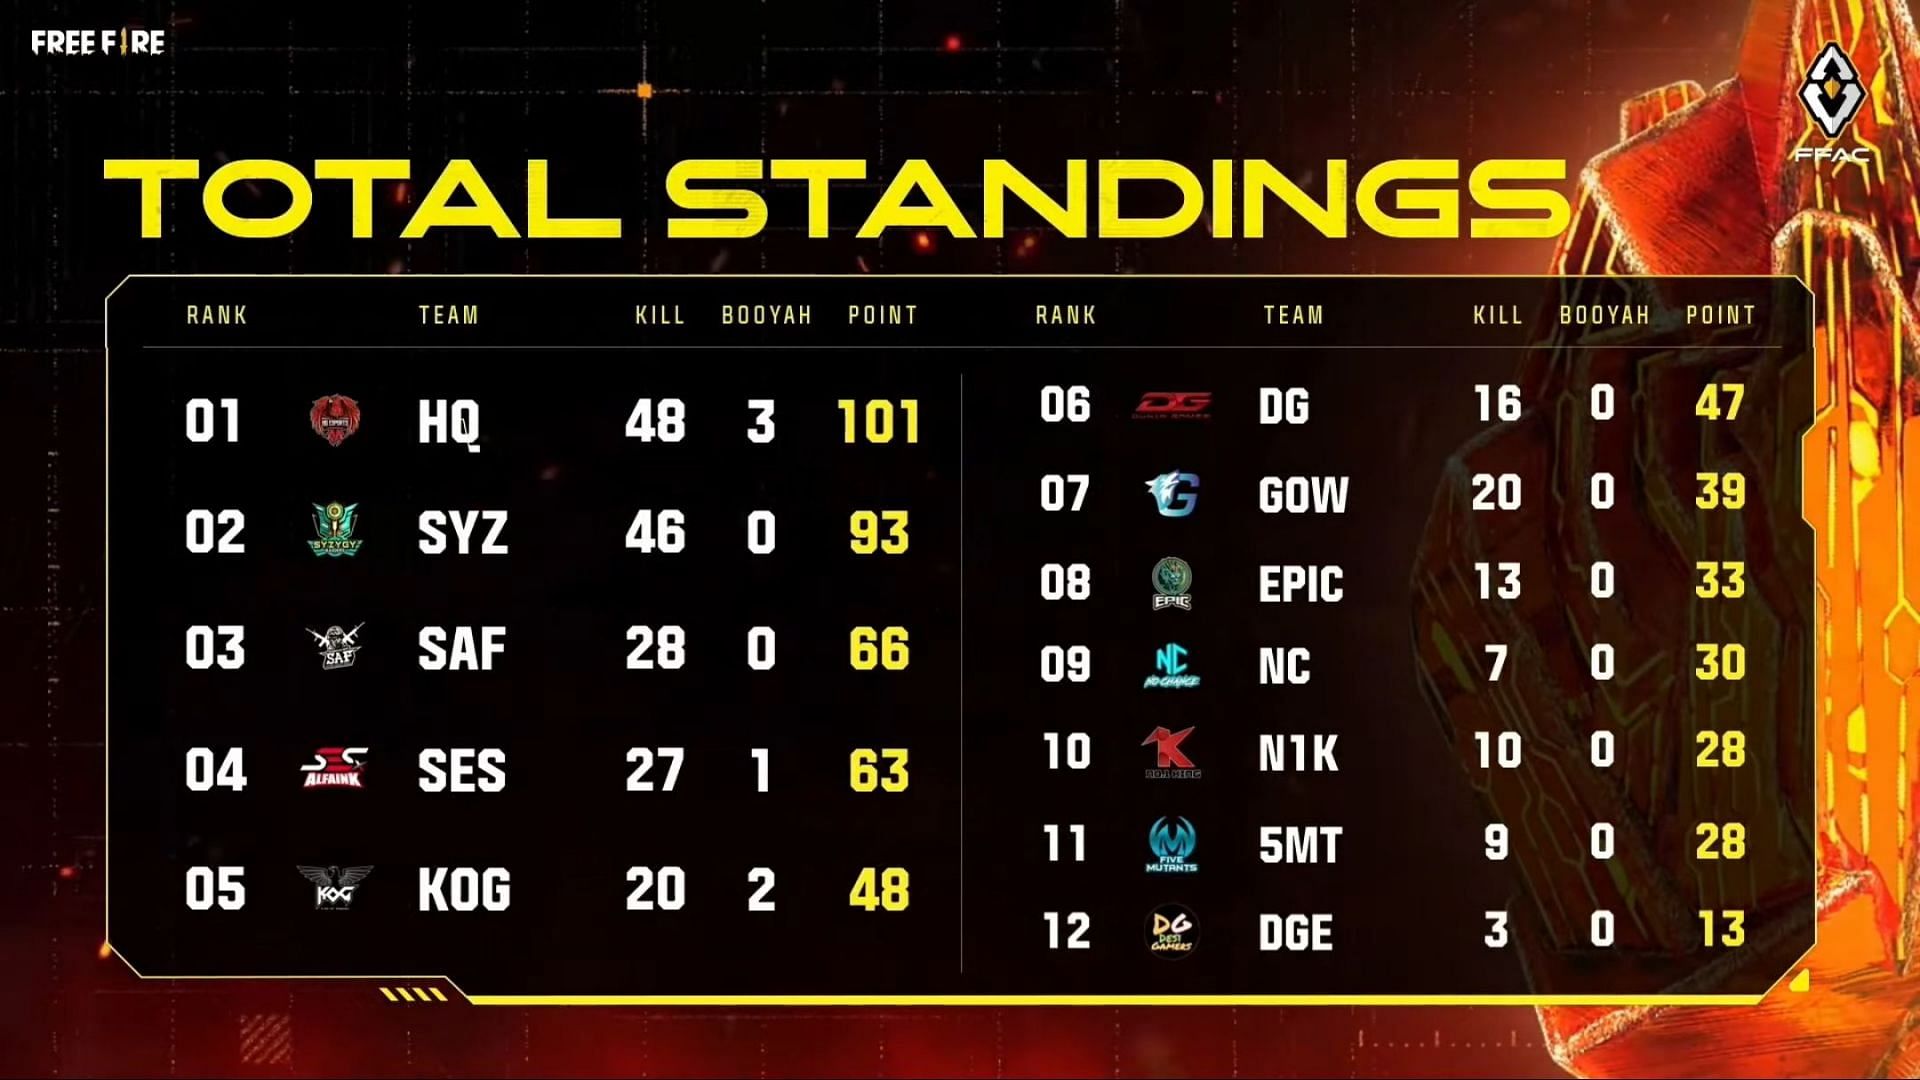 Free Fire Asia Championship 2021 Play-Ins Group A overall standings(Image via Garena Free Fire)